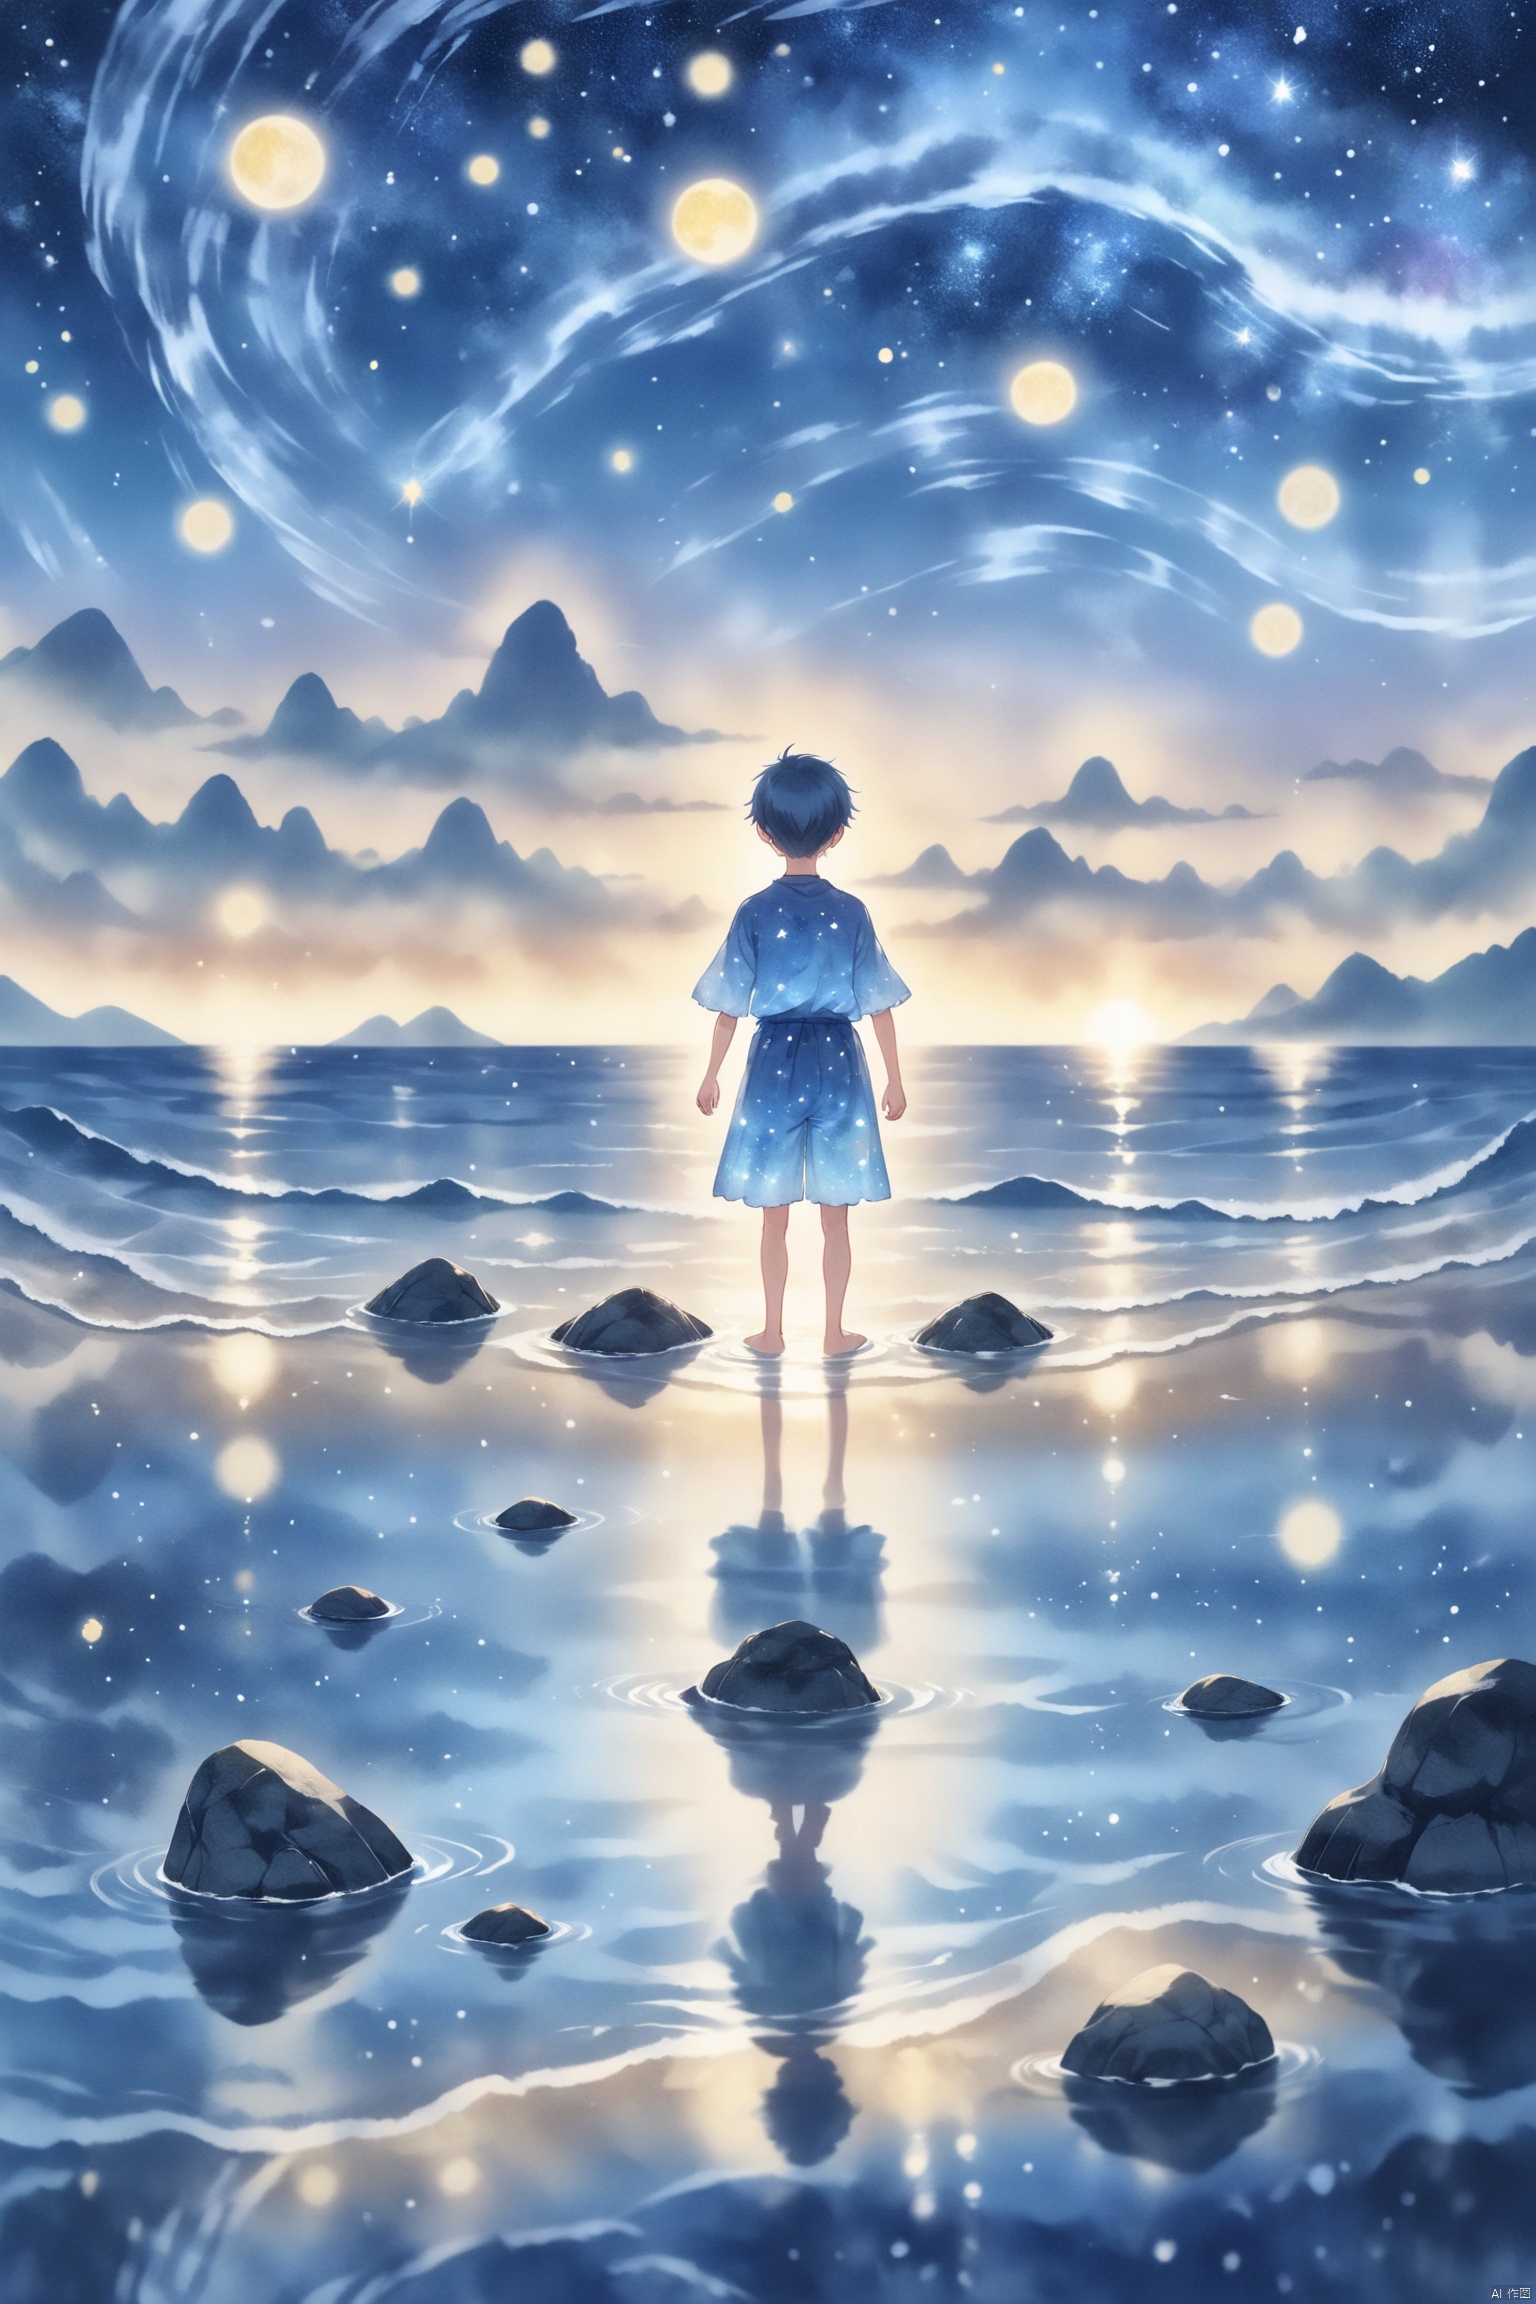 Photography Award Winning Entry,There is a rock in the middle of the sea,a boy stands on the rock in the middle of the sea and reaches out to pick the stars in the sky. ocean reflection,dawn blue,blue waves,happiness,dream fairy tale,fantasy,bright background,reflection,colourful,starry sky,8K,